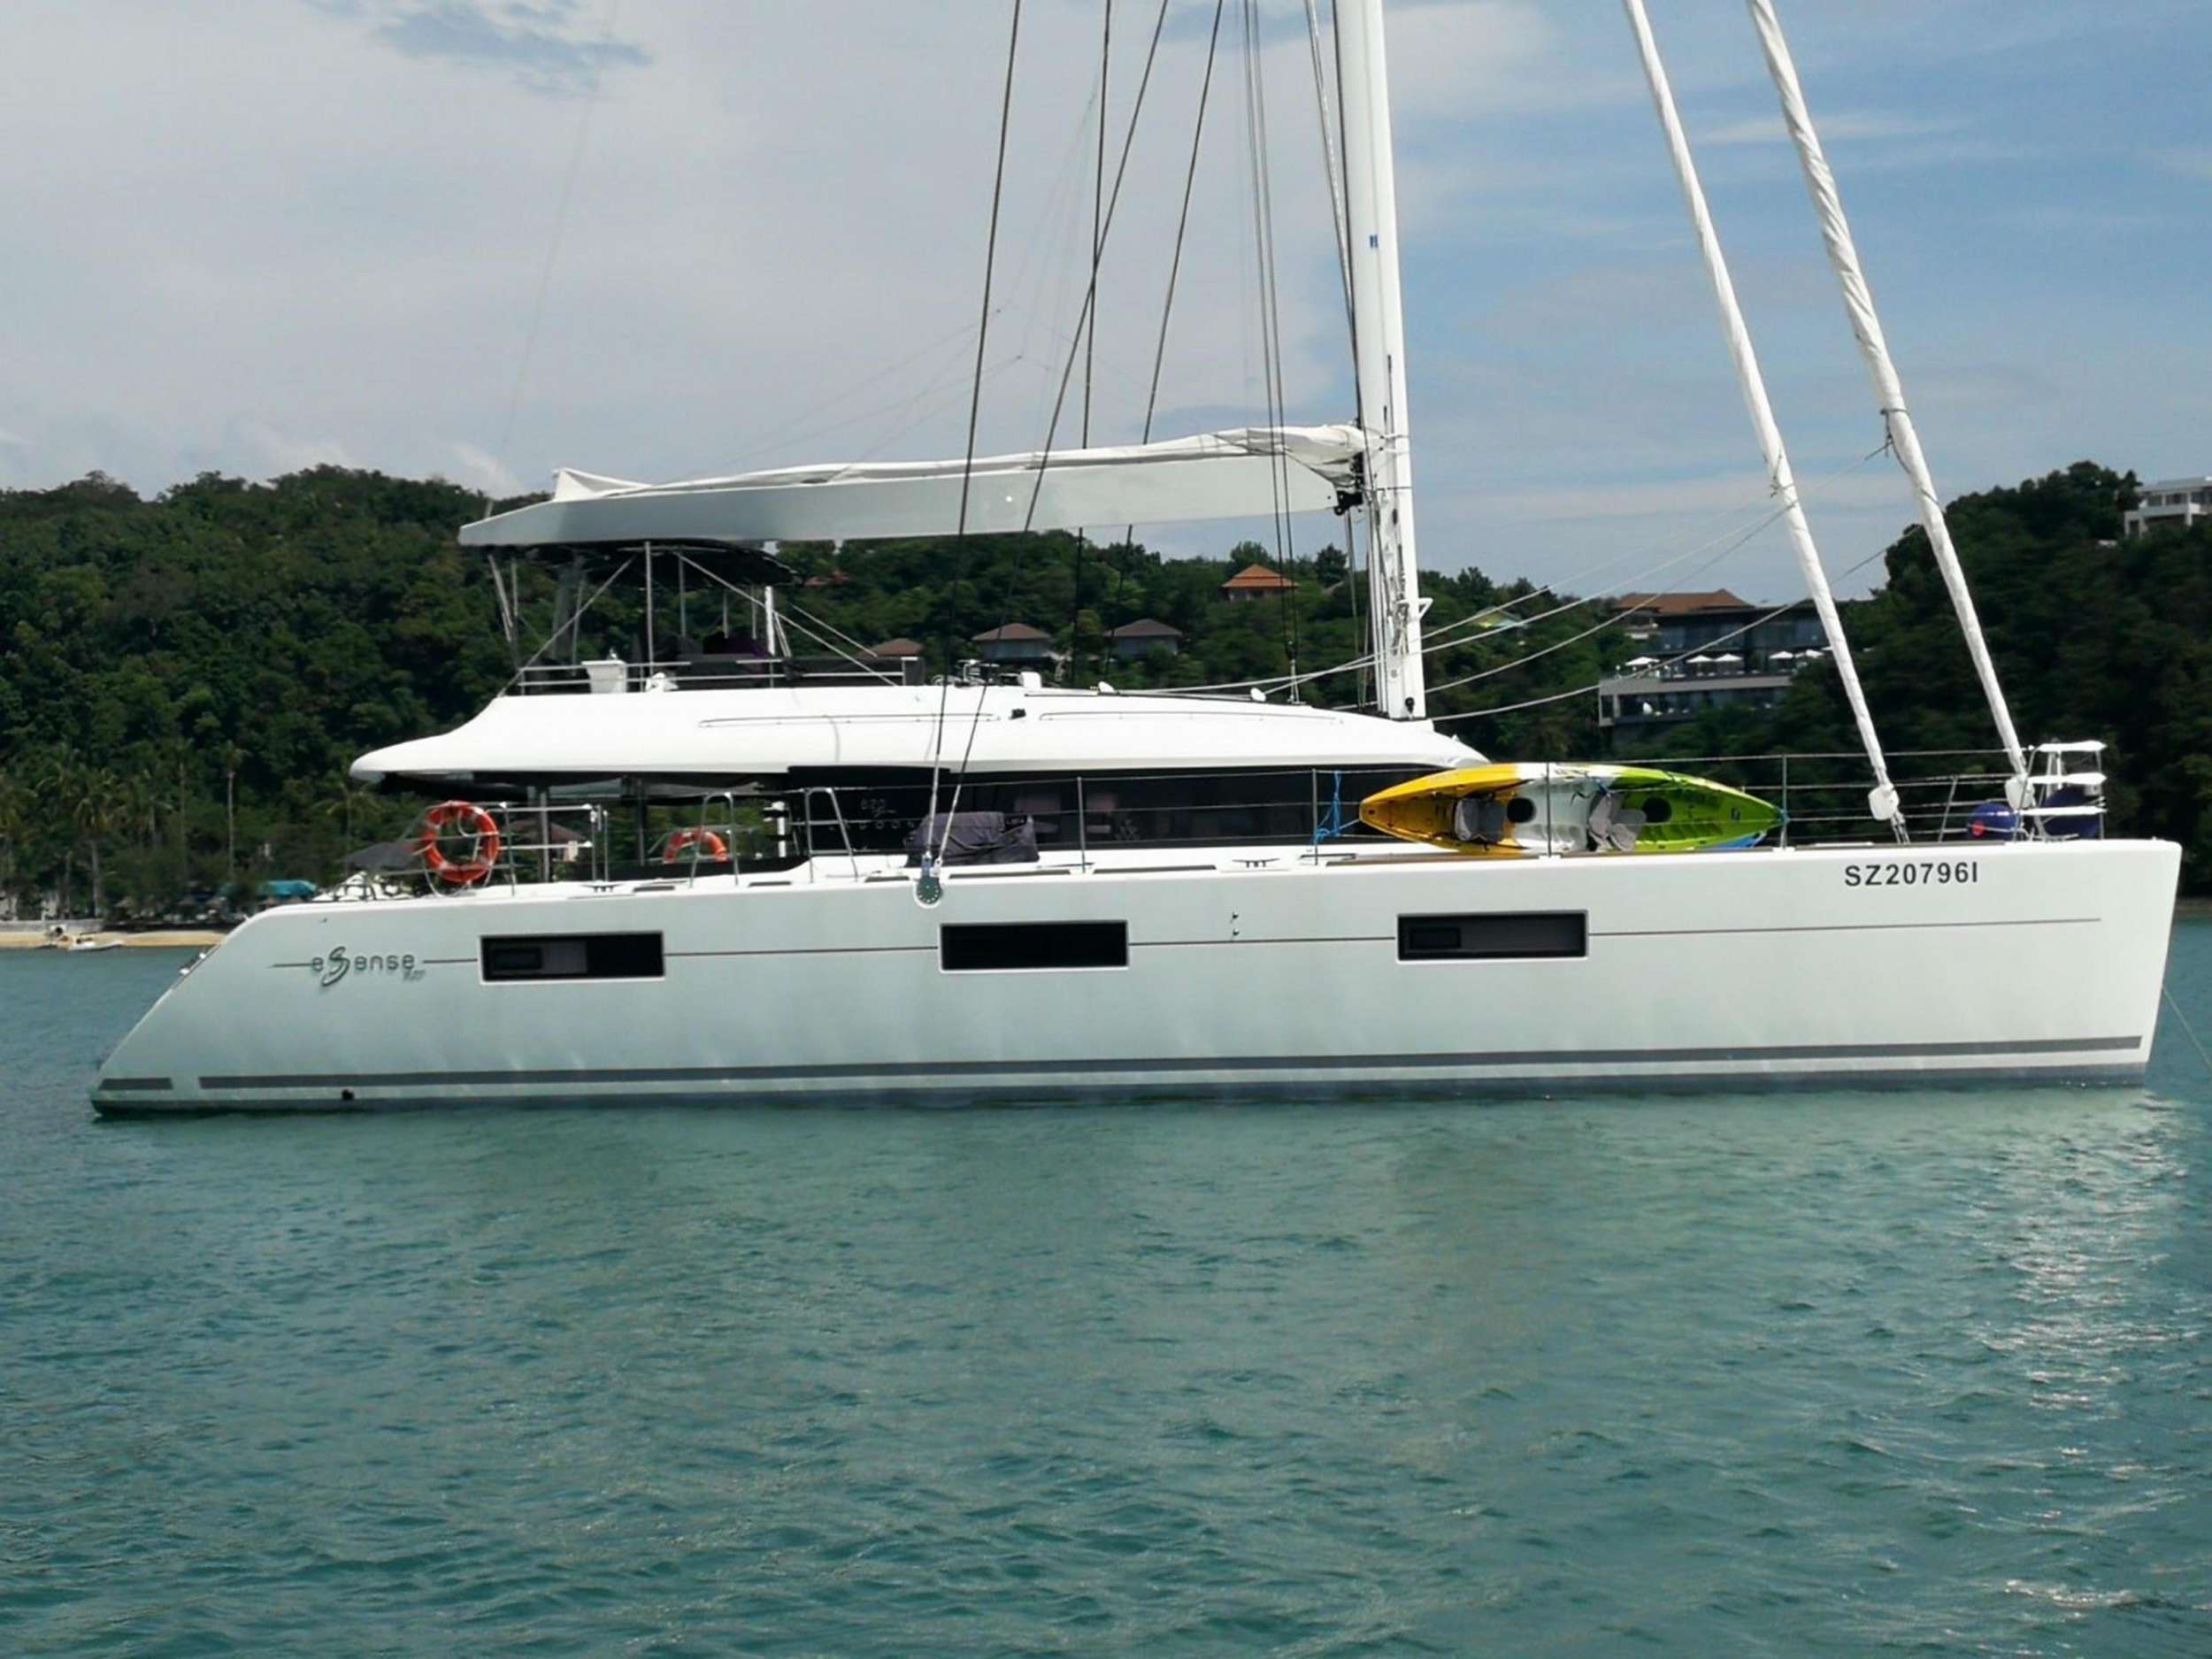 Six Degrees - Luxury yacht charter Thailand & Boat hire in SE Asia 1